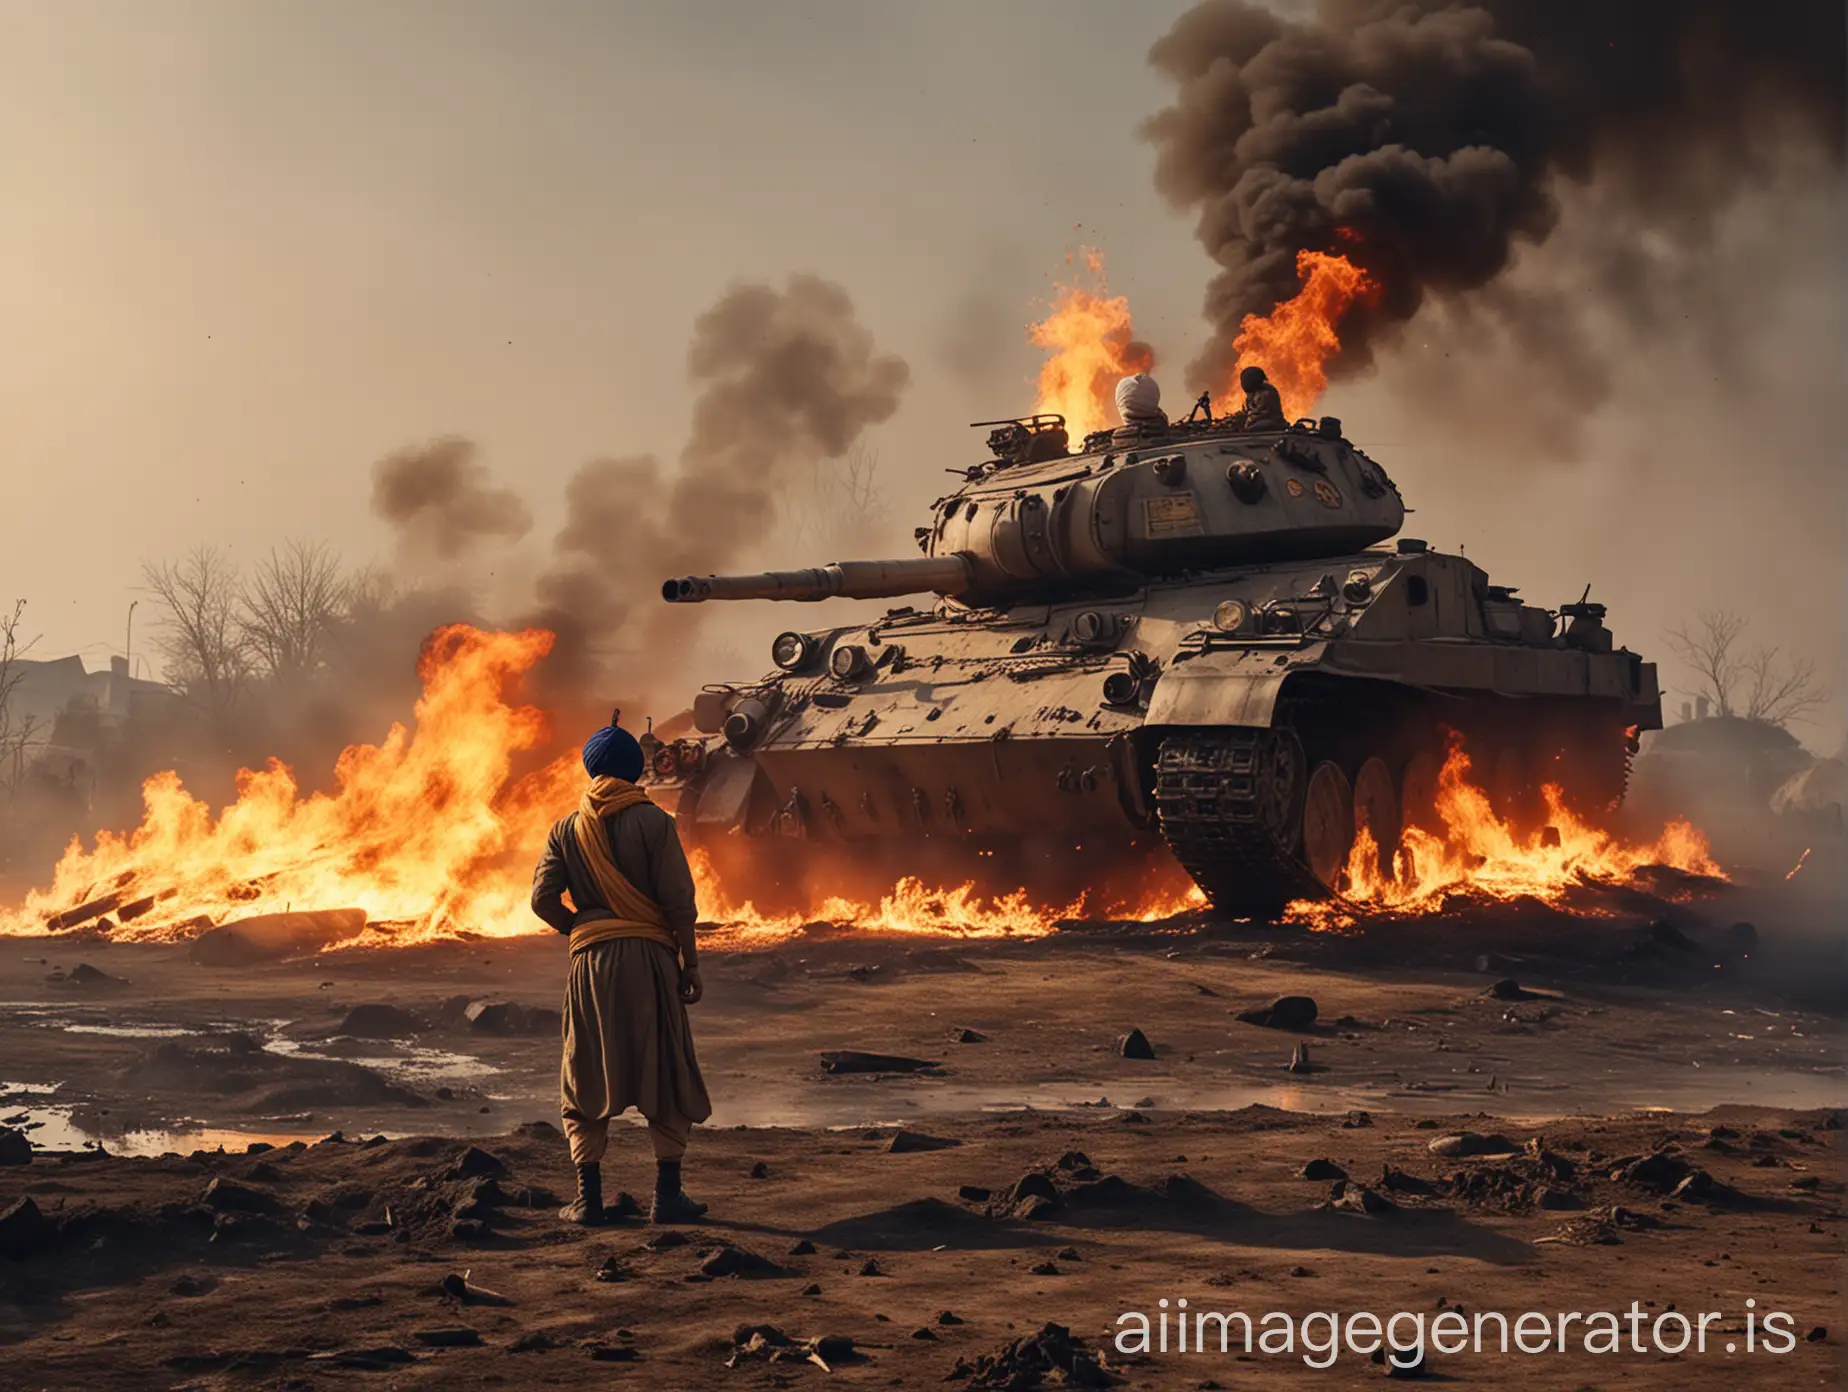 Landscape full HD battle atmosphere, there was a tank on fire with Sikh turban man sitting on the tank